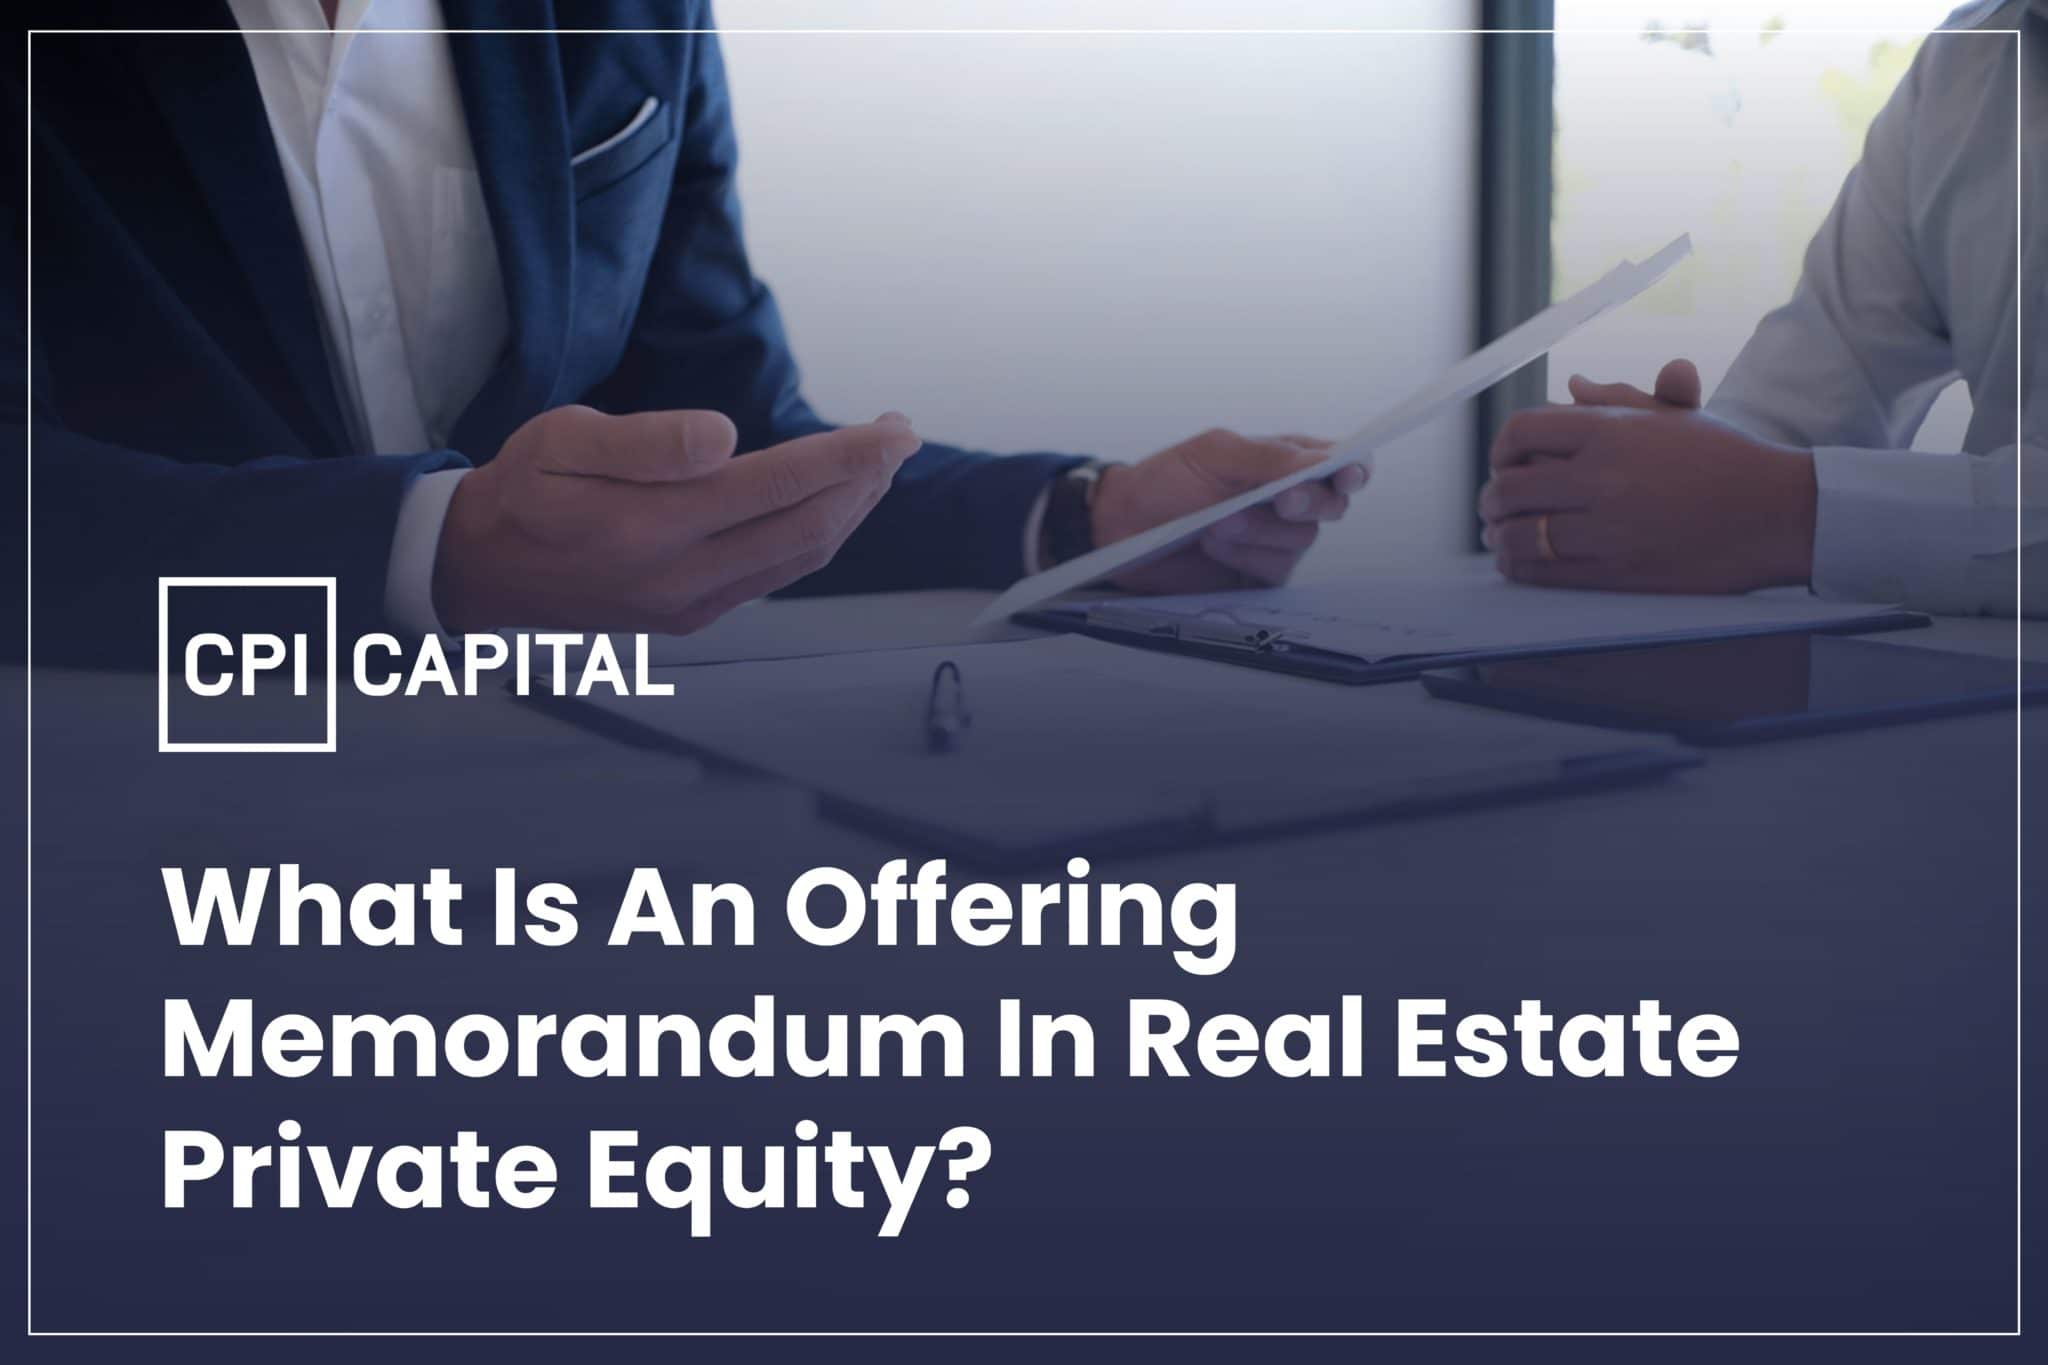 What is an Offering Memorandum in Real Estate Private Equity Syndications?